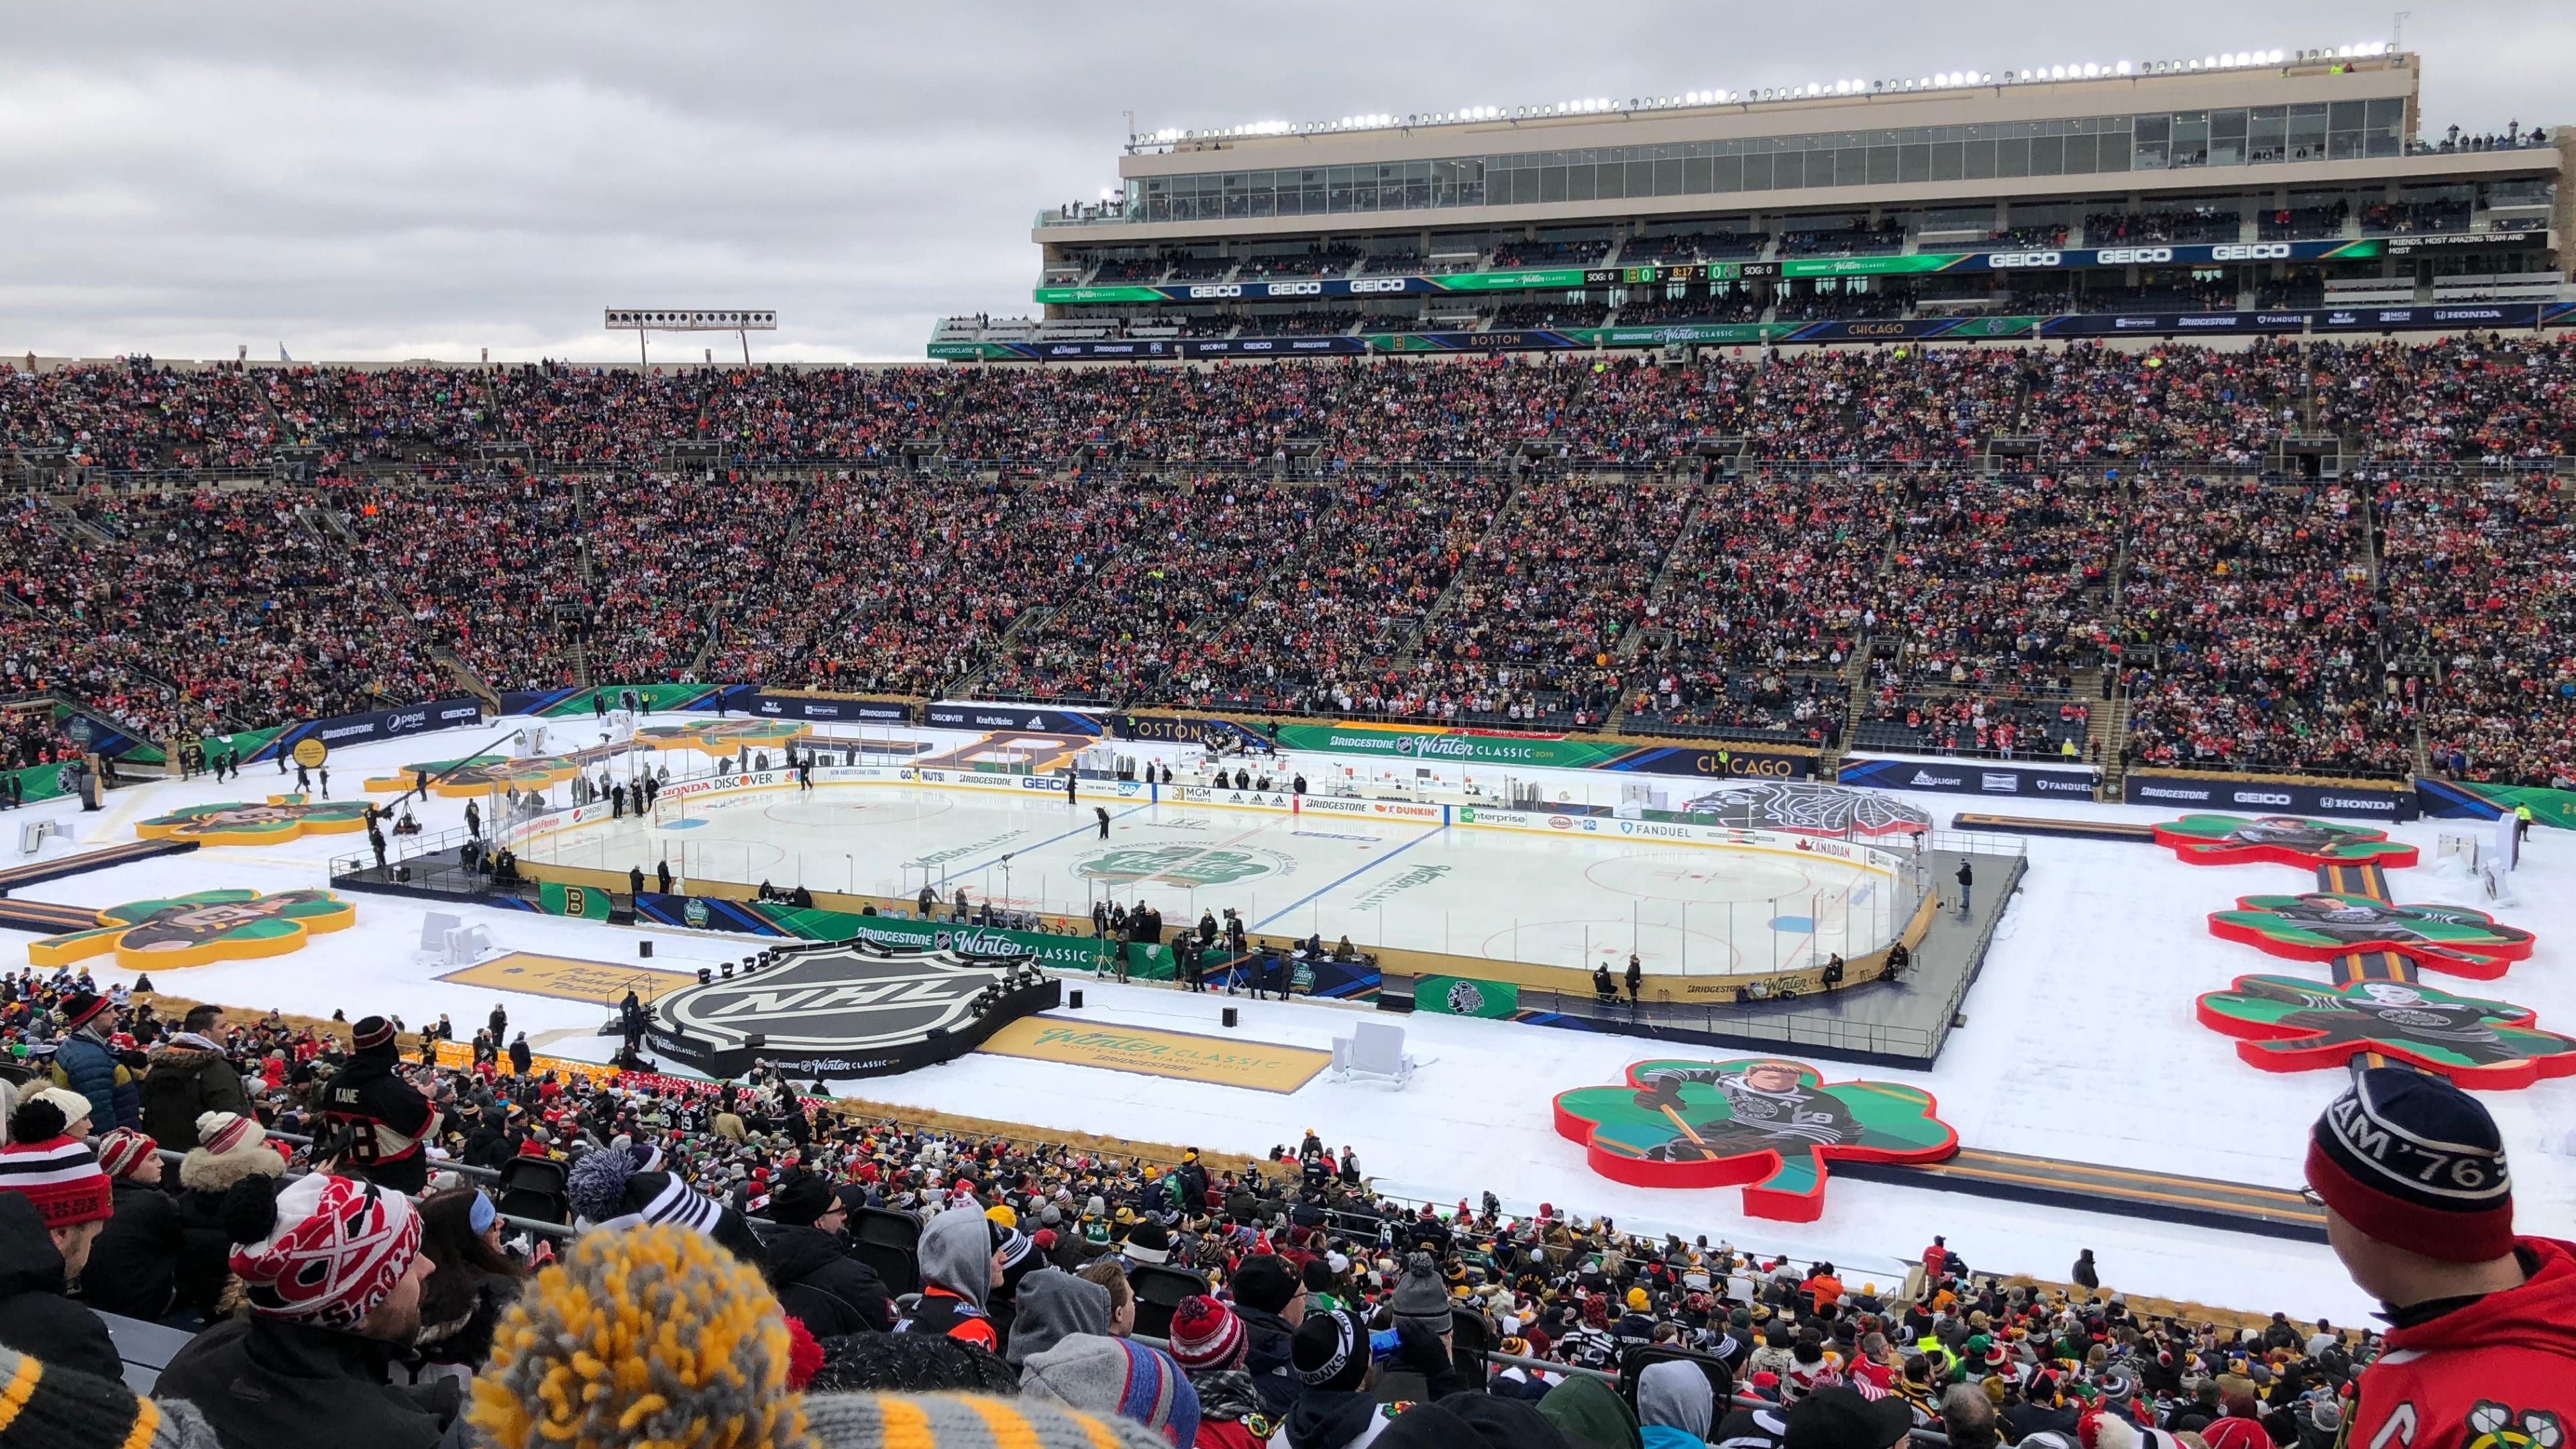 The 2019 Winter Classic at Notre Dame Stadium wallpaper backiee